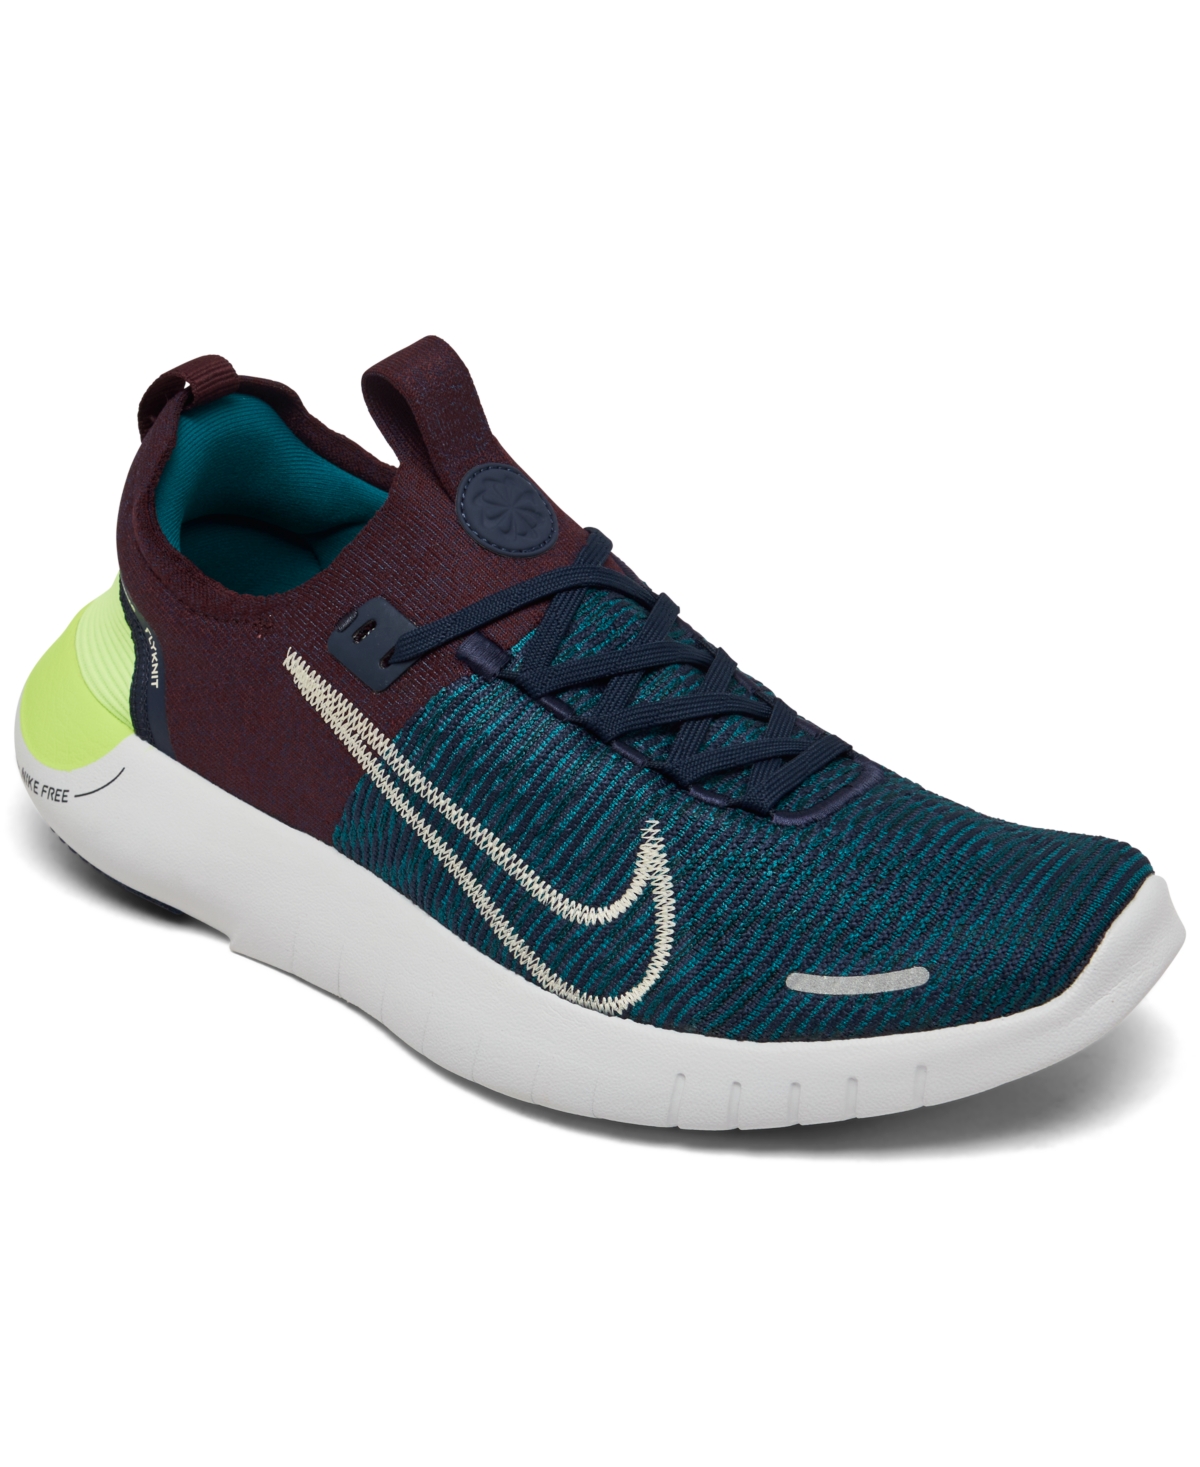 NIKE MEN'S FREE RUN FLY KNIT NEXT NATURE RUNNING SNEAKERS FROM FINISH LINE